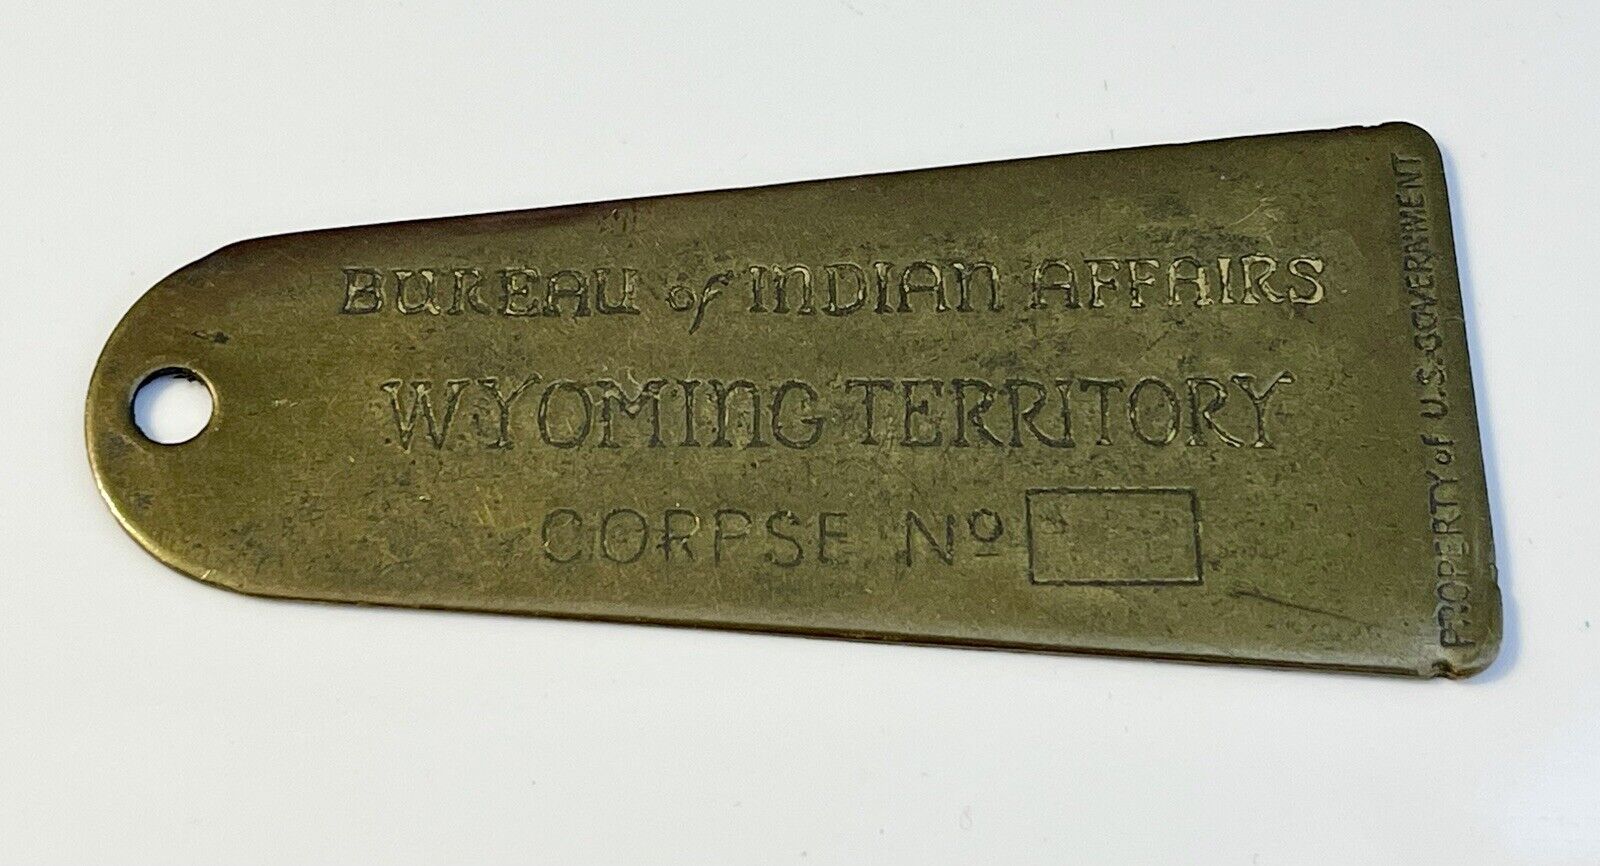 Vintage Bureau of Indian Affairs Wyoming Territory Brass Corpse Tag